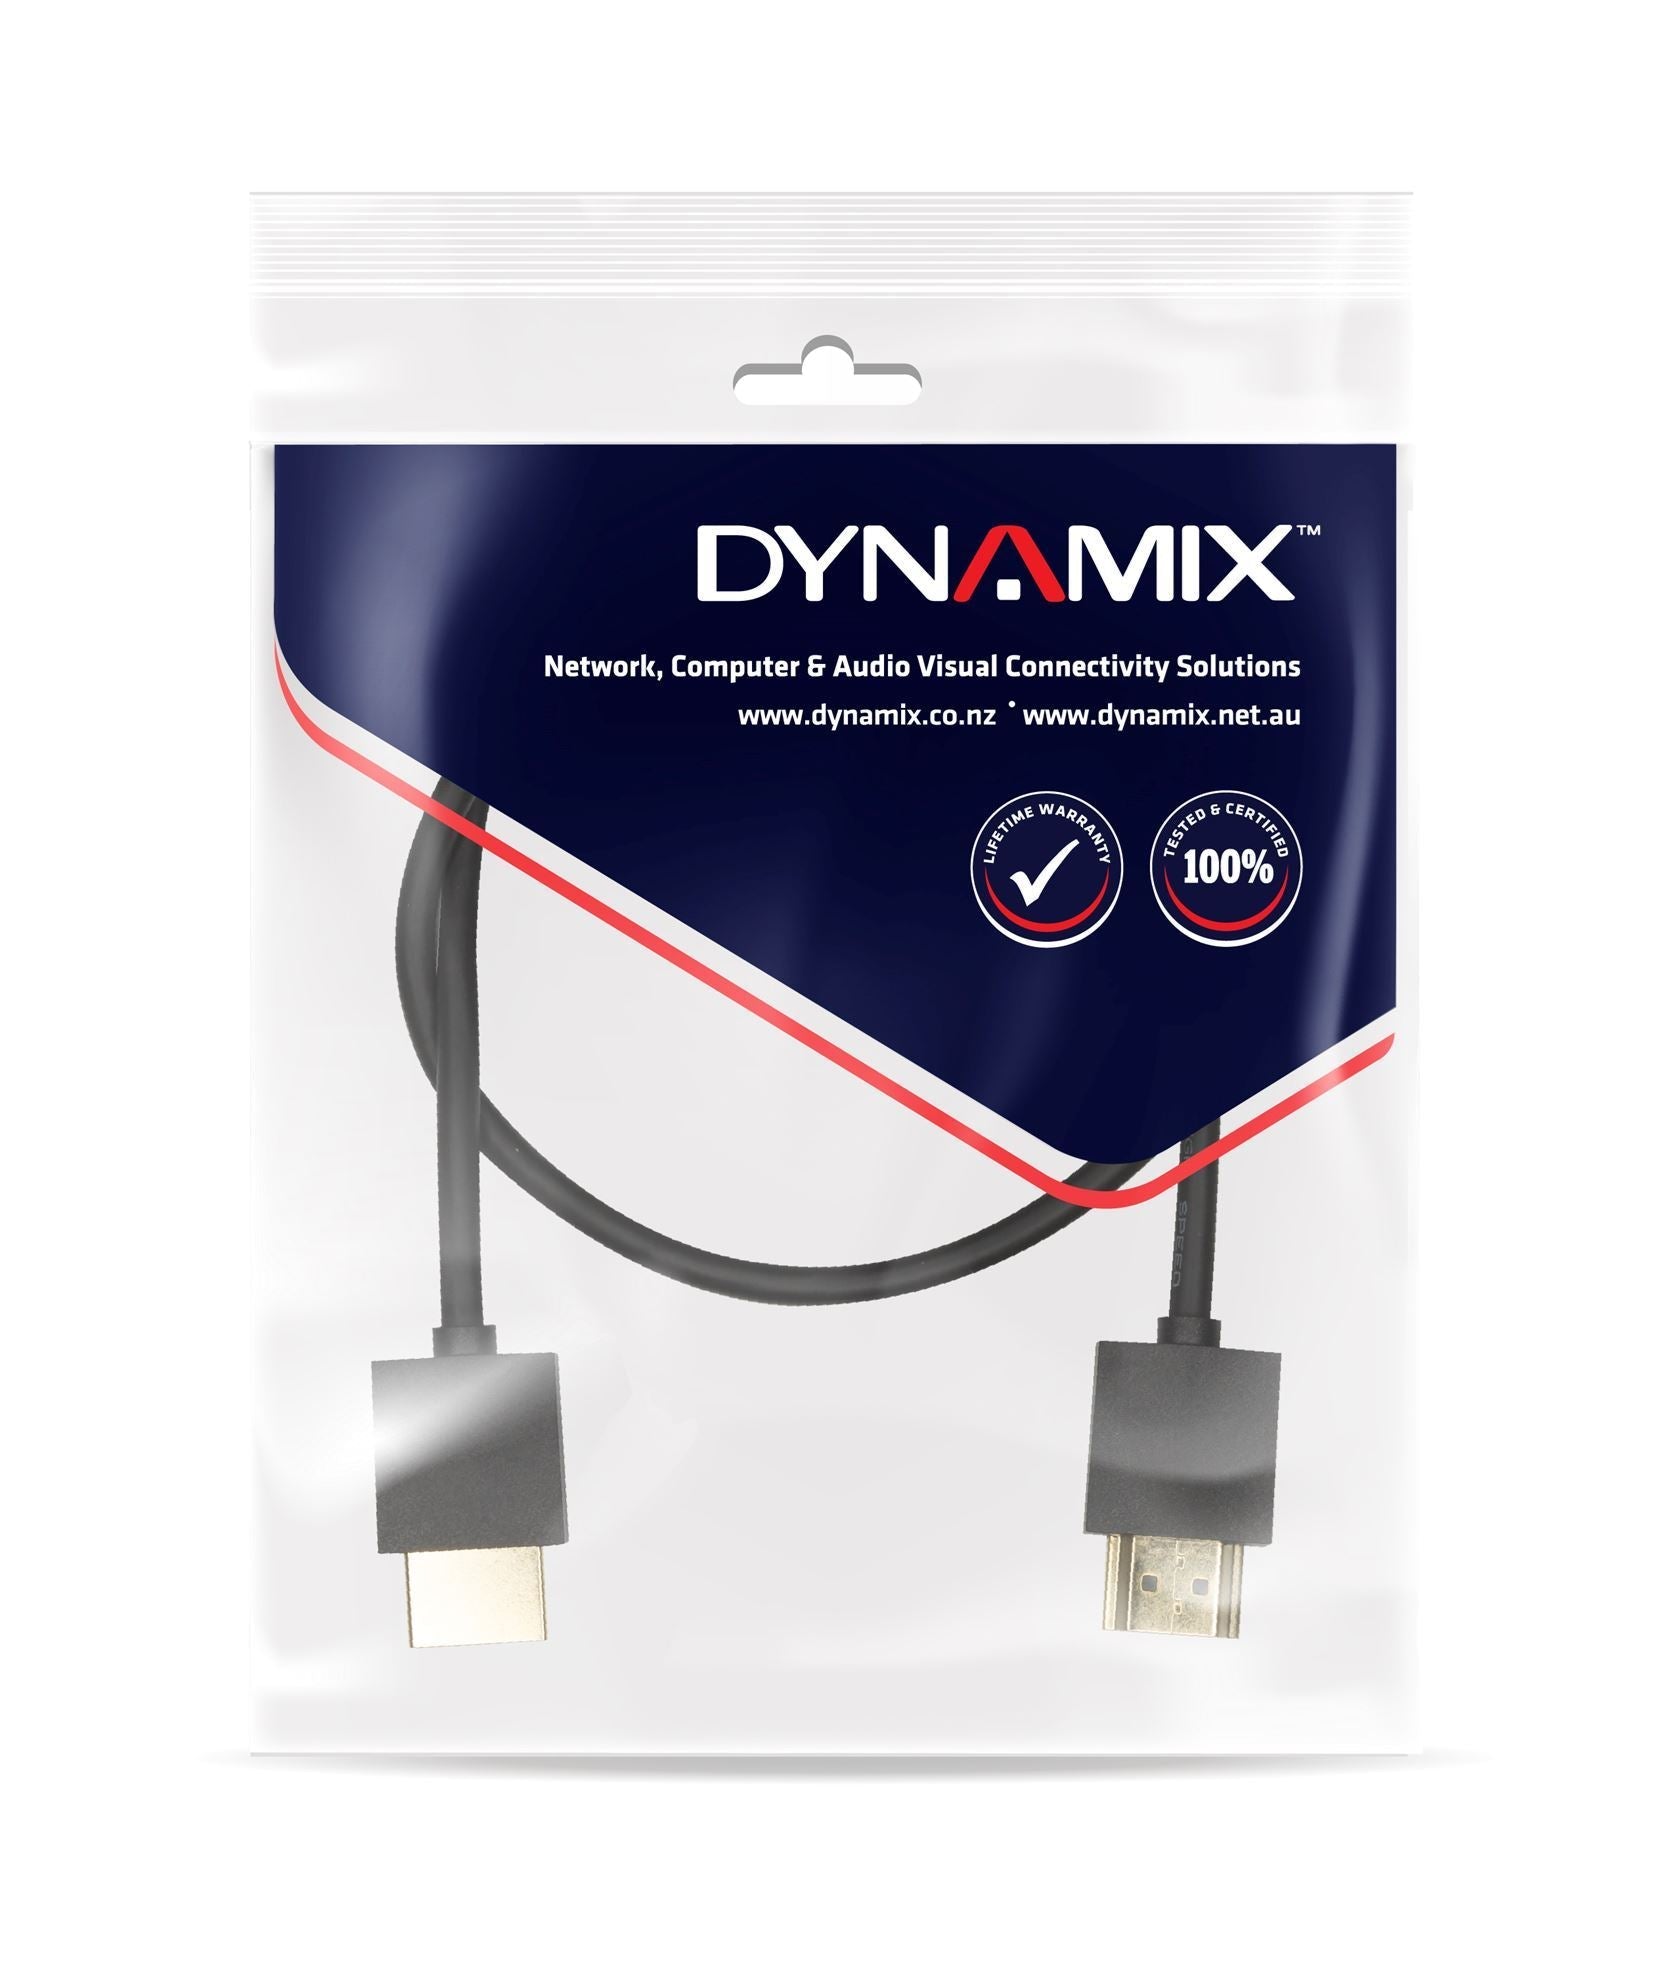 DYNAMIX_1.5M_HDMI_BLACK_Nano_High_Speed_With_Ethernet_Cable._Designed_for_UHD_Display_up_to_4K2K@60Hz._Slimline_Robust_Cable._Supports_CEC_2.0,_3D,_&_ARC._Supports_Up_to_32_Audio_Channels. 680